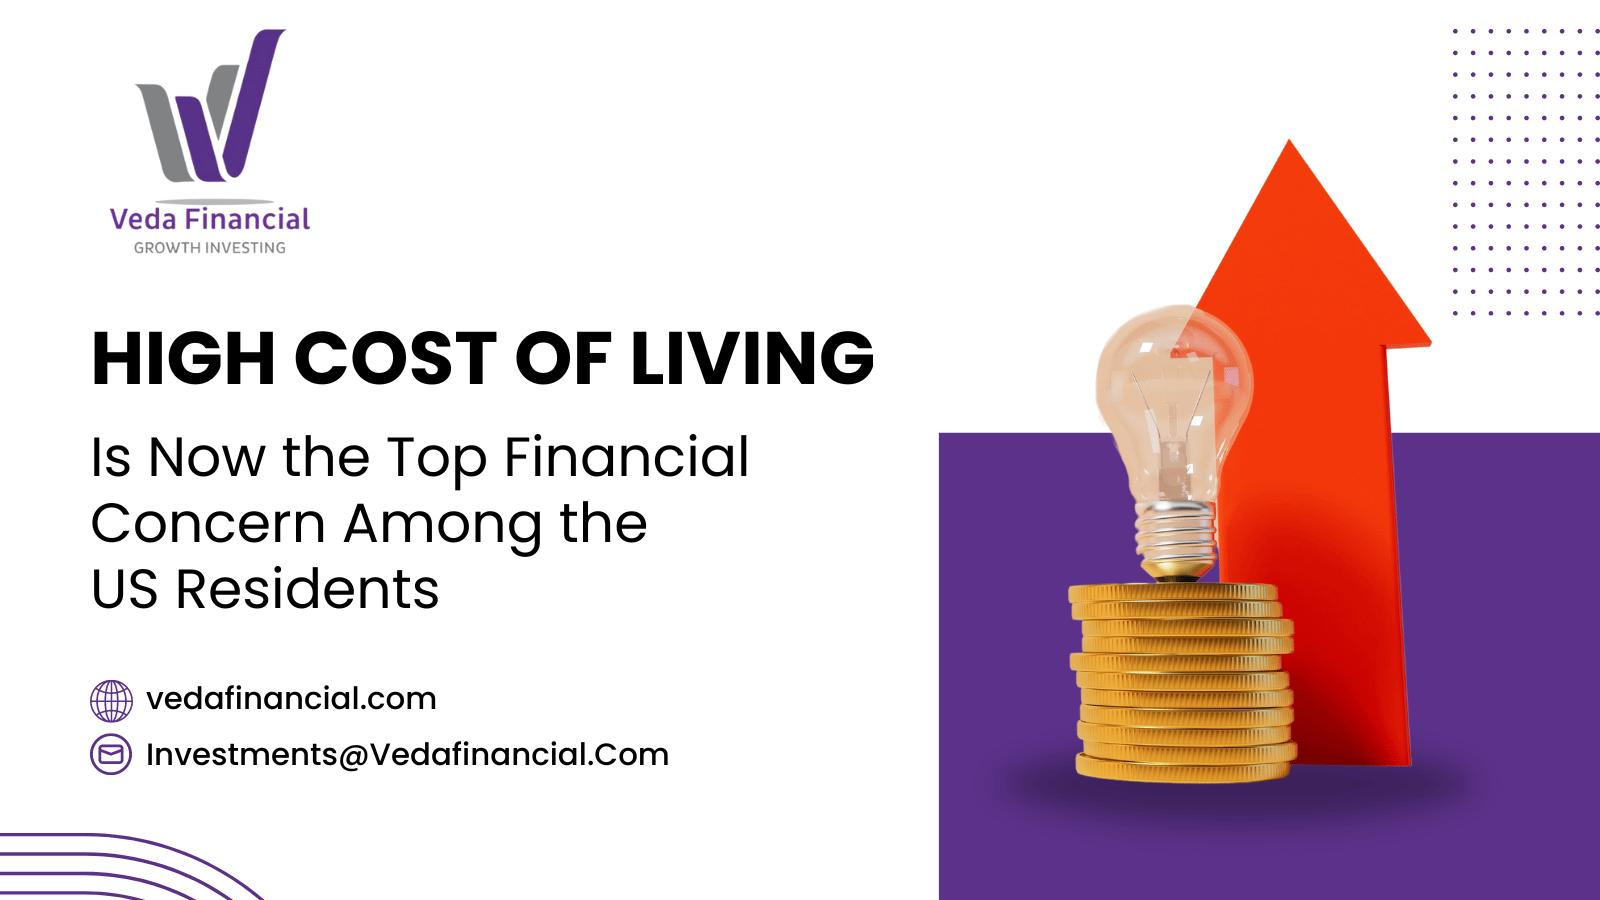 The High Cost of Living Is Now the Top Financial Concern Among US Residents